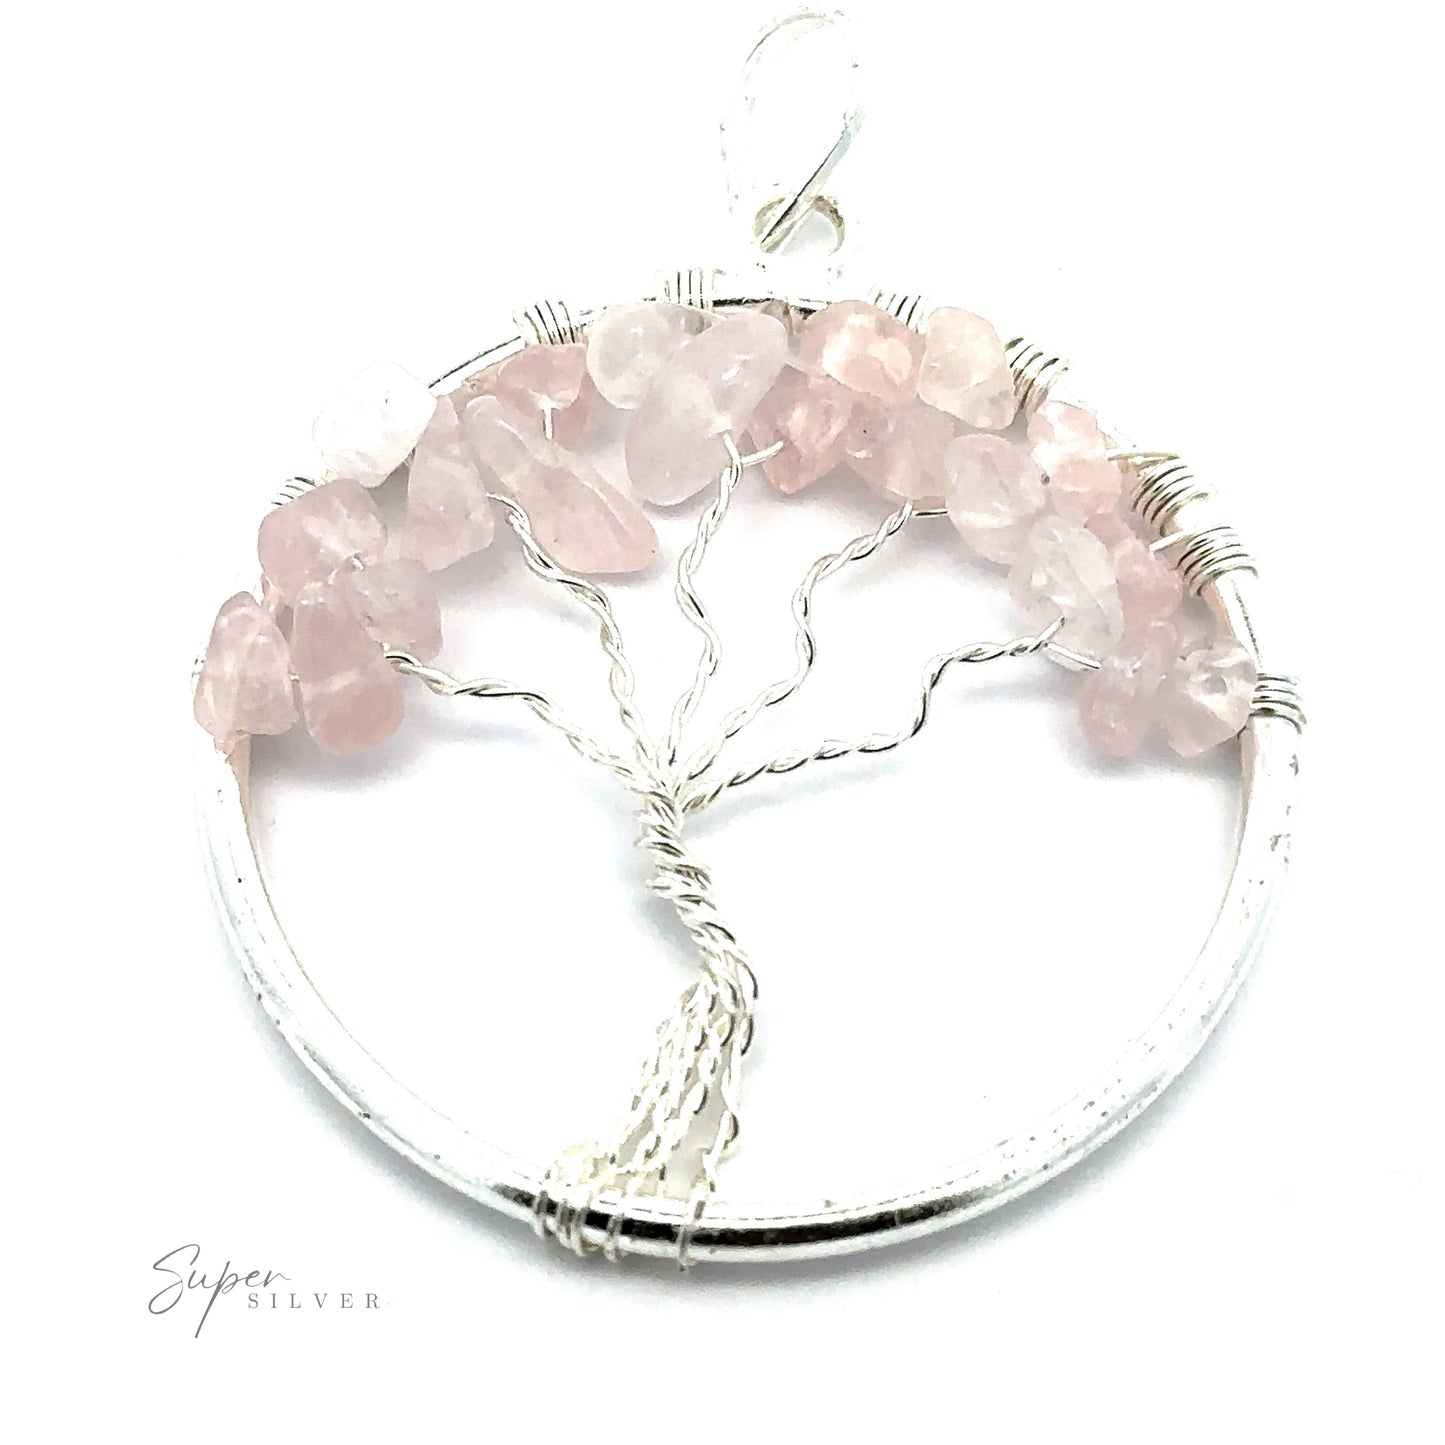 
                  
                    A silver circular Wire Wrapped Tree of Life Pendant with Stones featuring a tree design made from twisted wire and adorned with small pink gemstones. The words "Super Silver" are visible in the bottom left corner.
                  
                